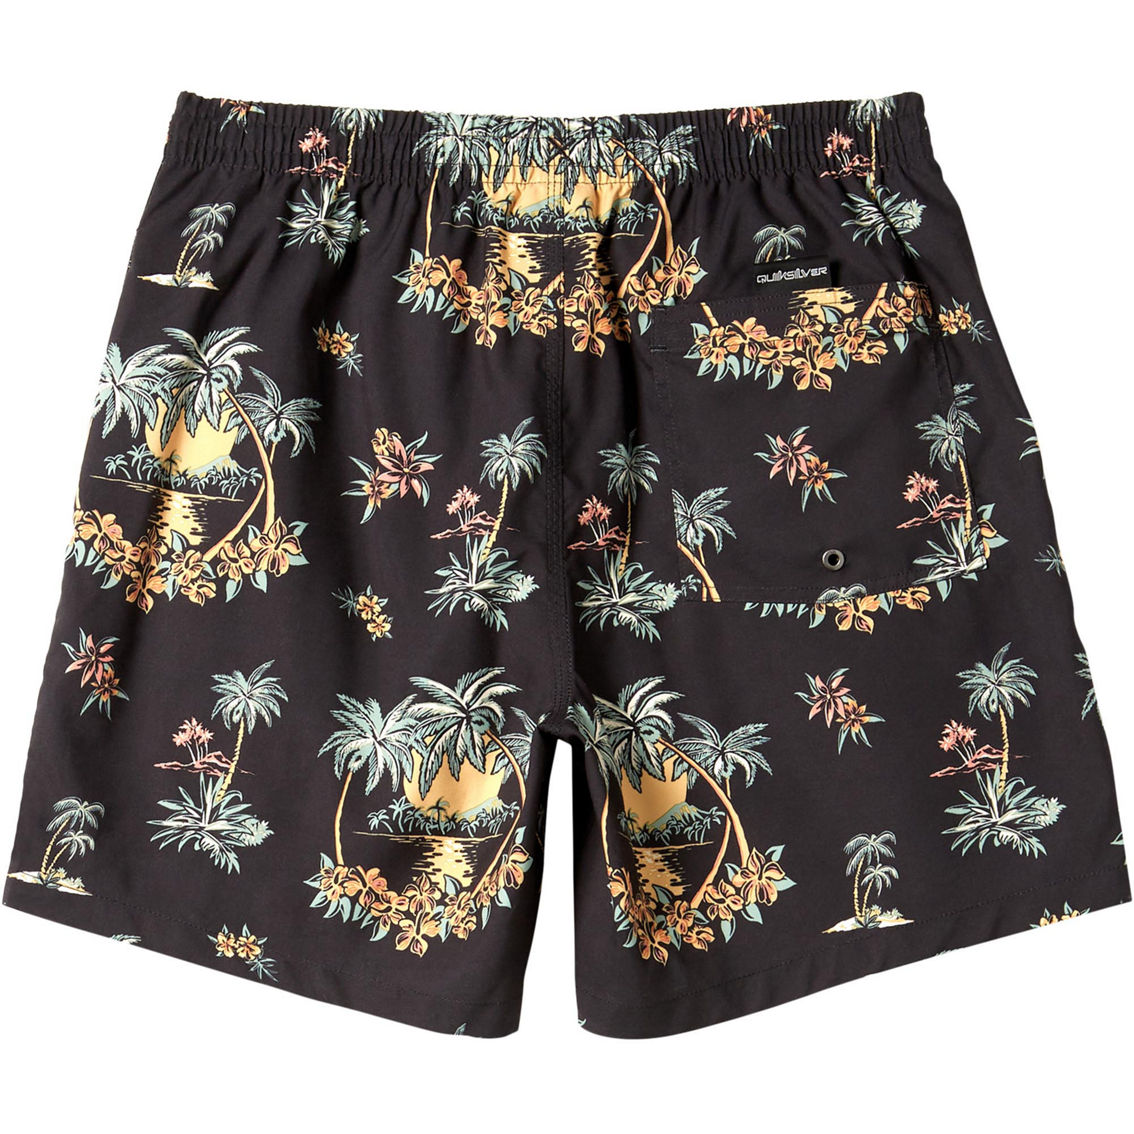 Quiksilver Everyday Mix 17 in. Volley Swim Shorts - Image 6 of 6